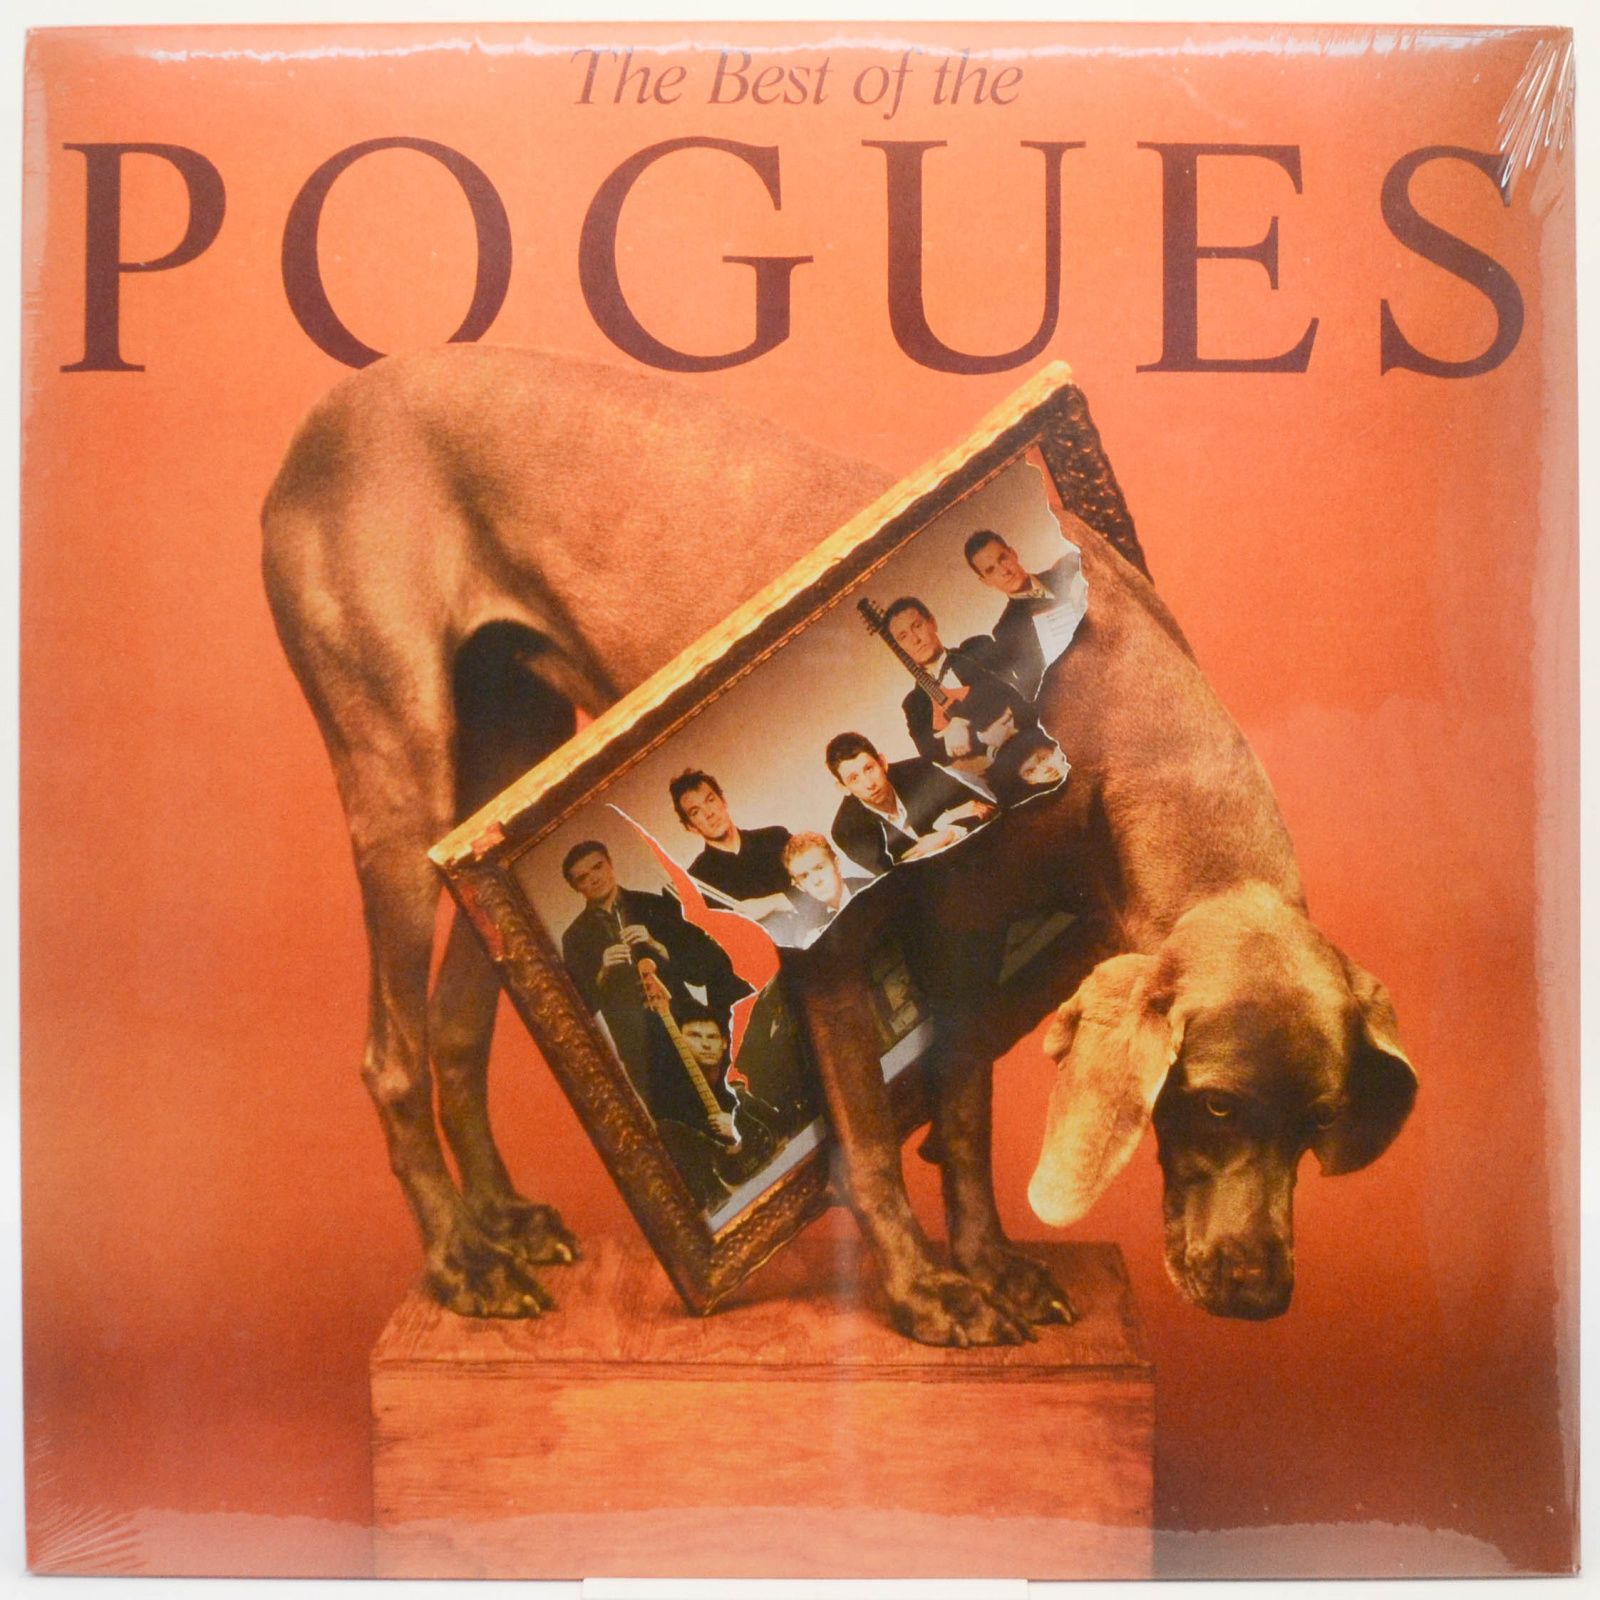 Pogues — The Best Of The Pogues, 2018